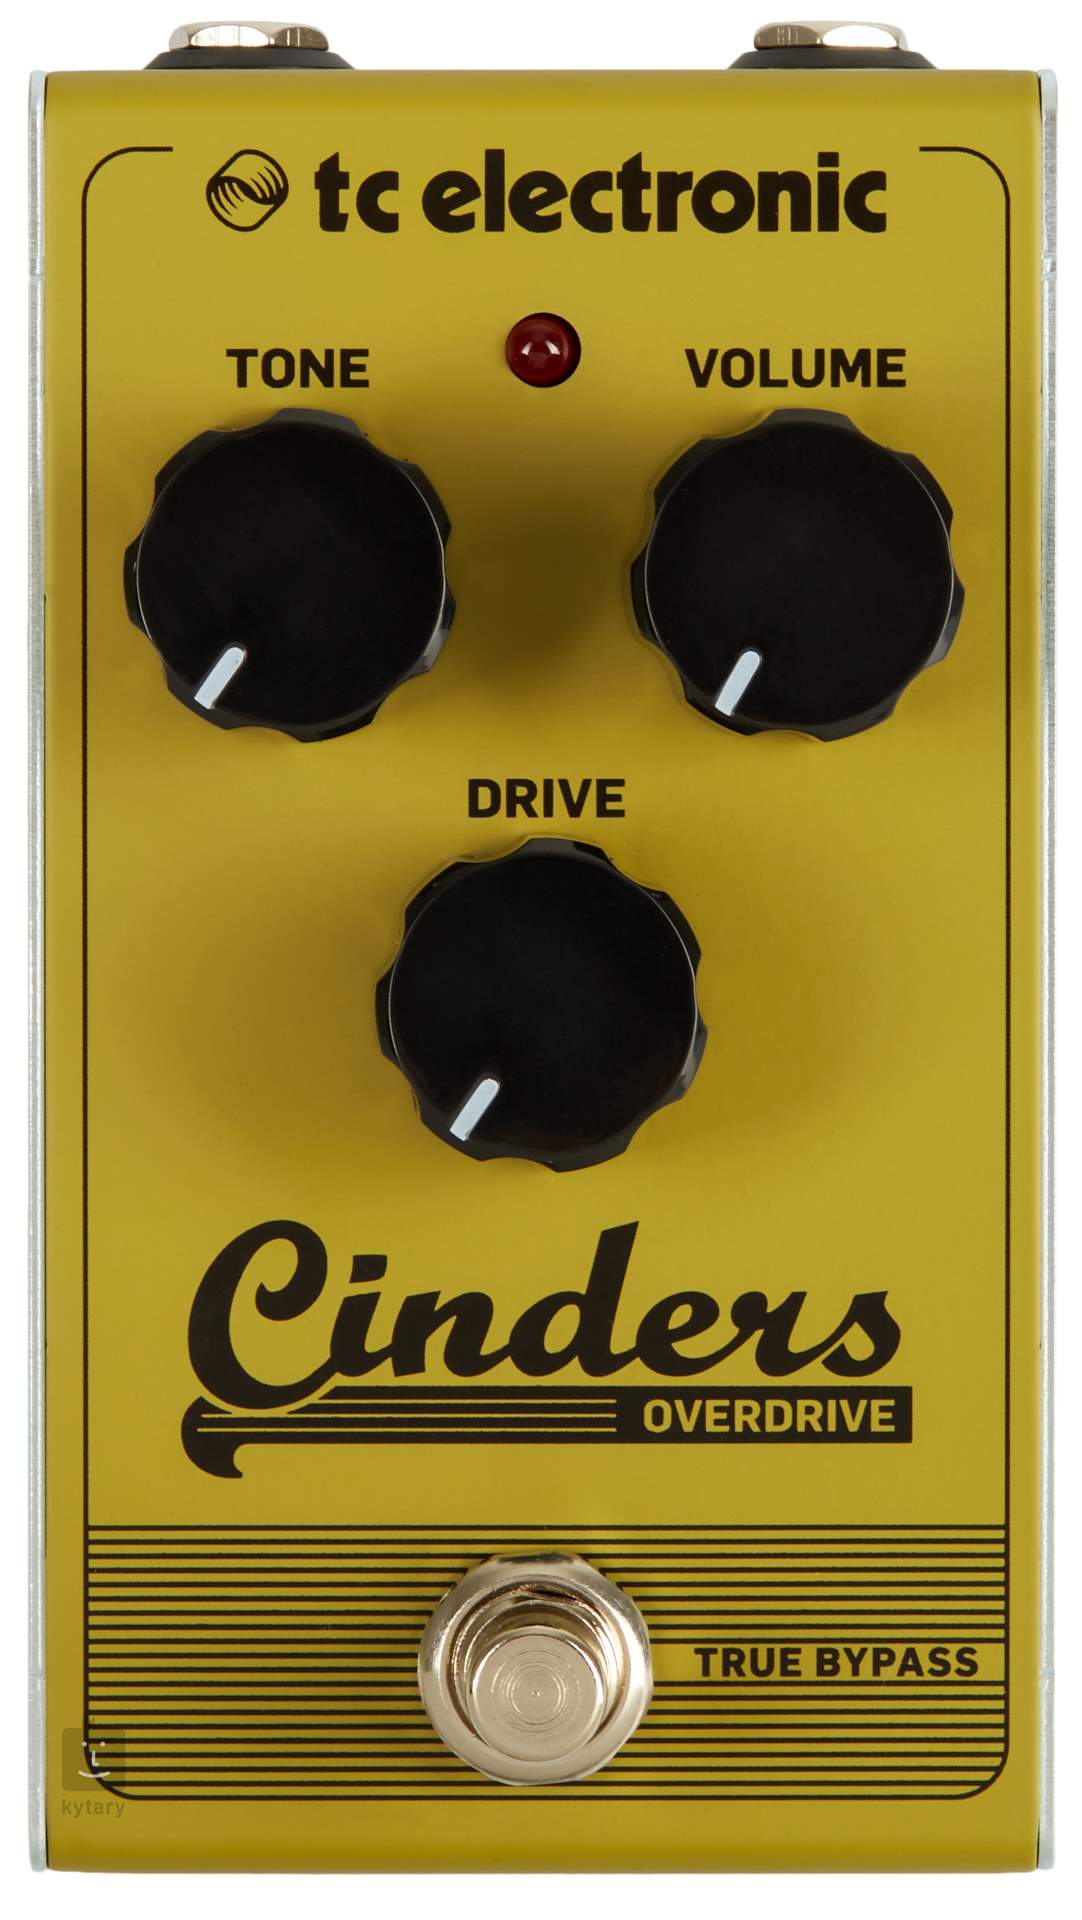 cinders overdrive